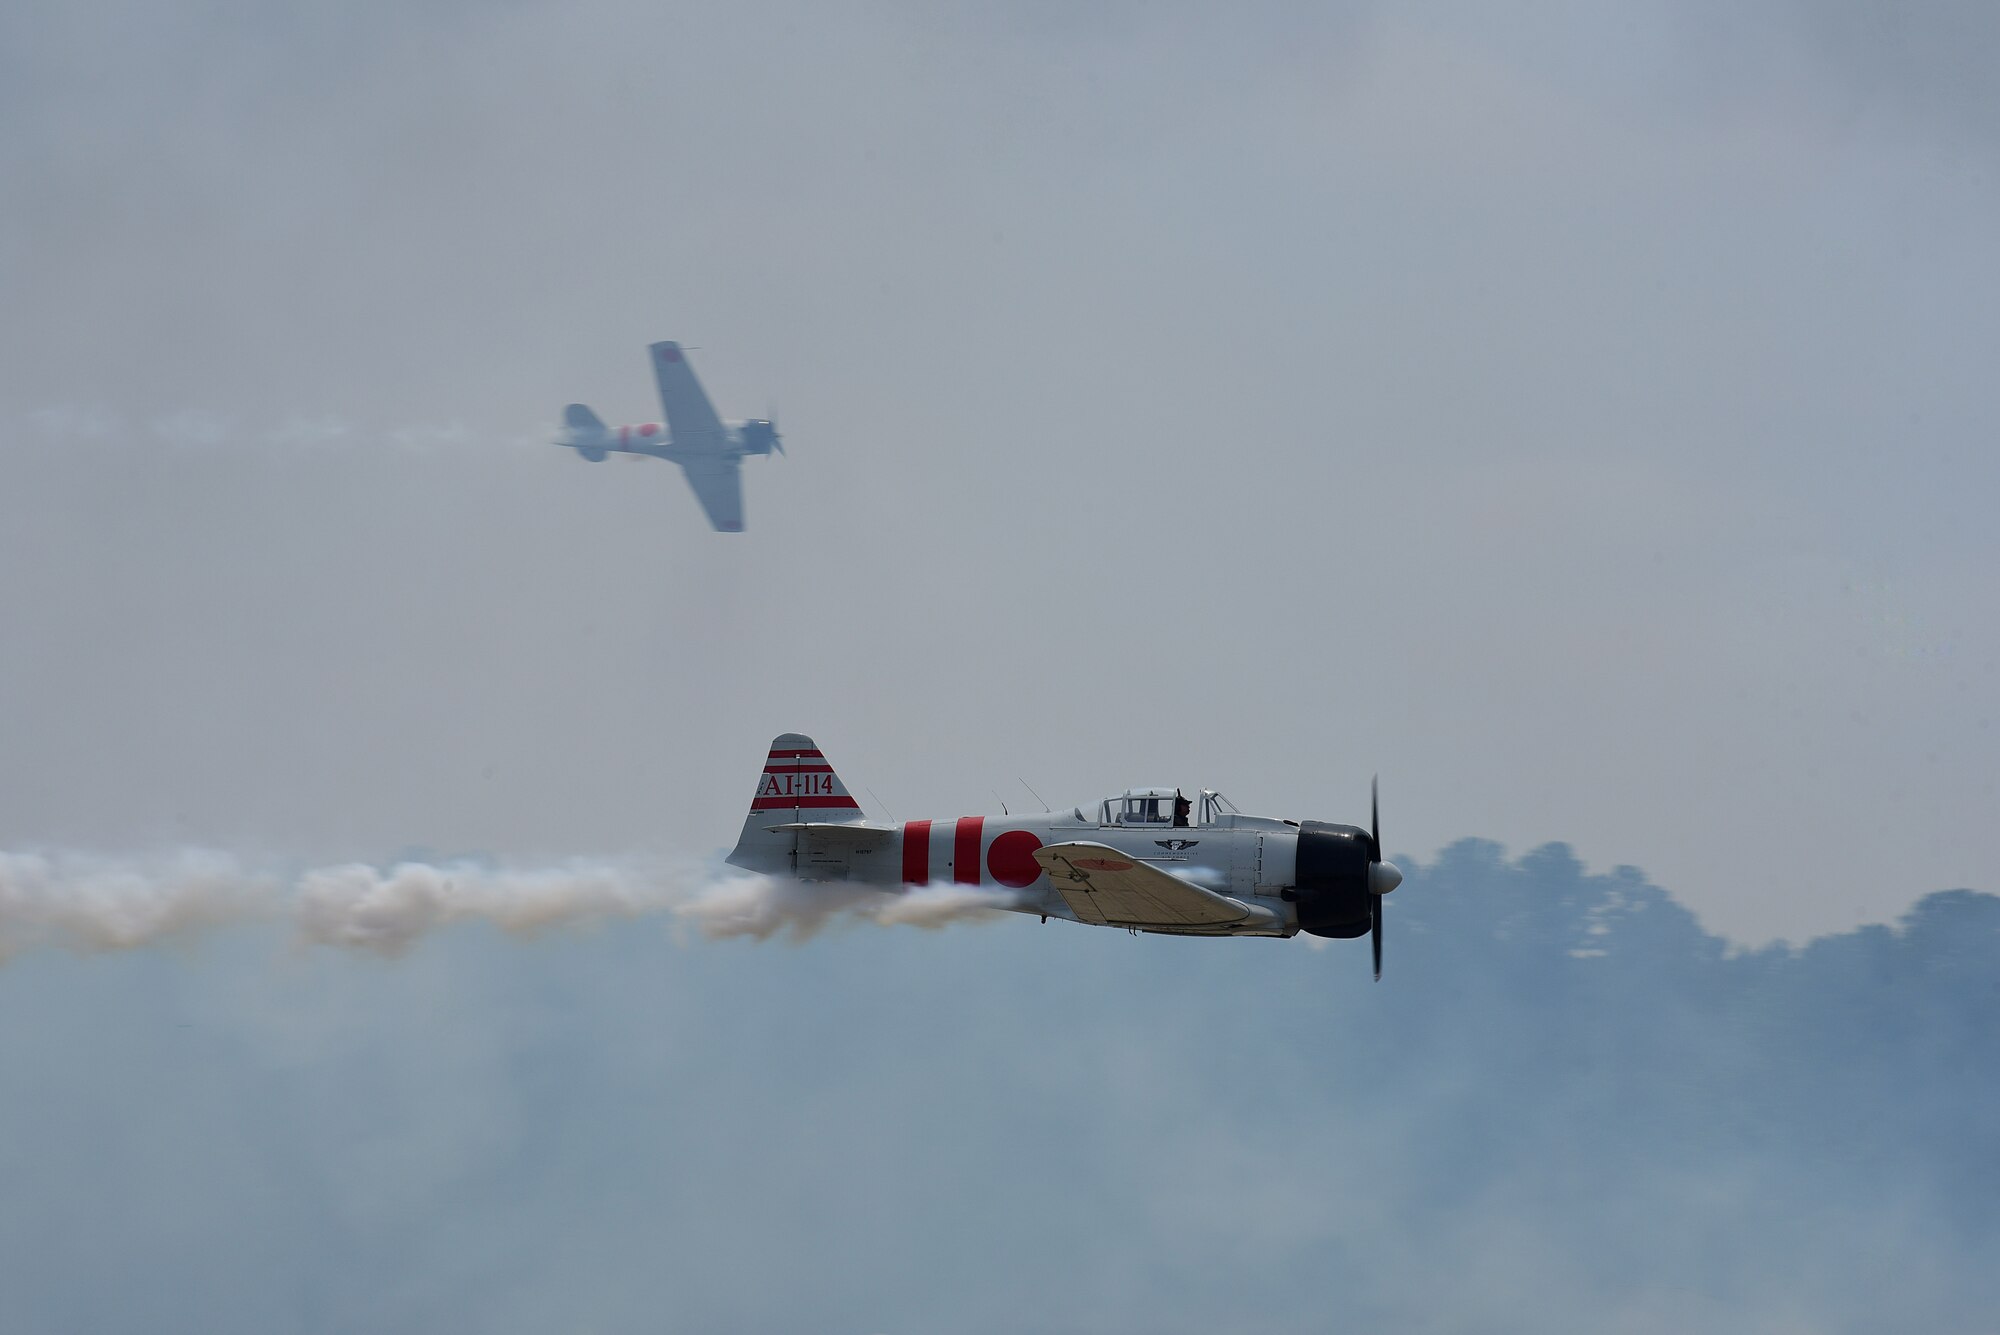 Two Japanese Mitsubishi A6M Zero aircraft perform as part of the "Tora! Tora! Tora!" performance during the Wings Over Wayne Air Show, May 21, 2017, at Seymour Johnson Air Force Base, North Carolina. The air show is a way for Seymour Johnson AFB to thank local and regional communities for their ongoing support. (U.S. Air Force photo by Airman 1st Class Kenneth Boyton)